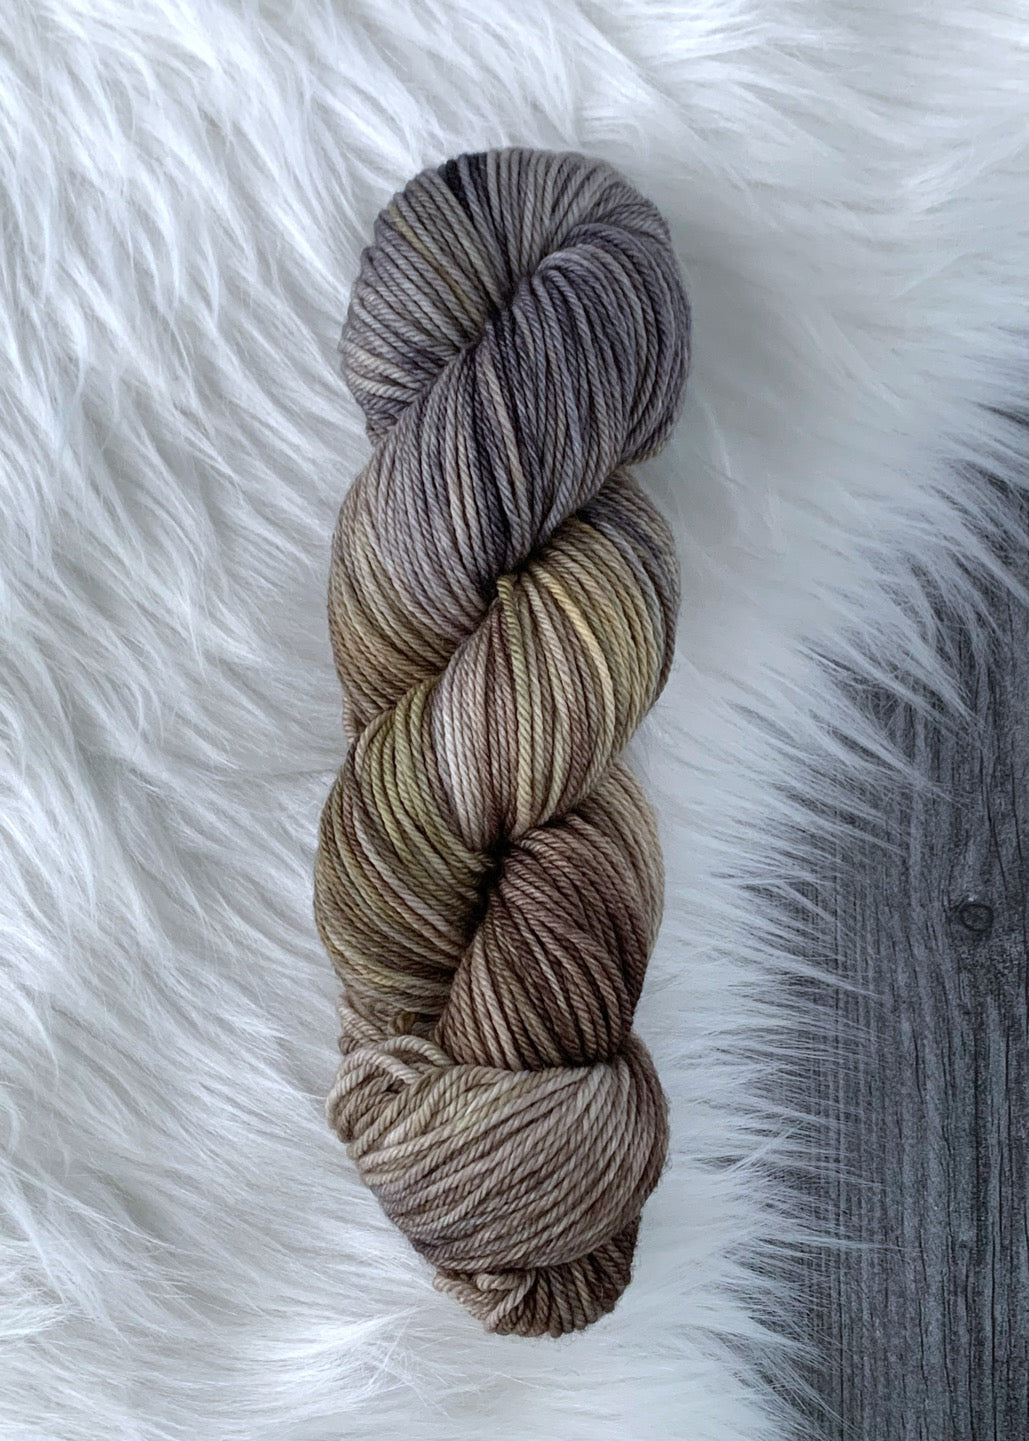 Aged Metal Merino Worsted (Ready to Ship)